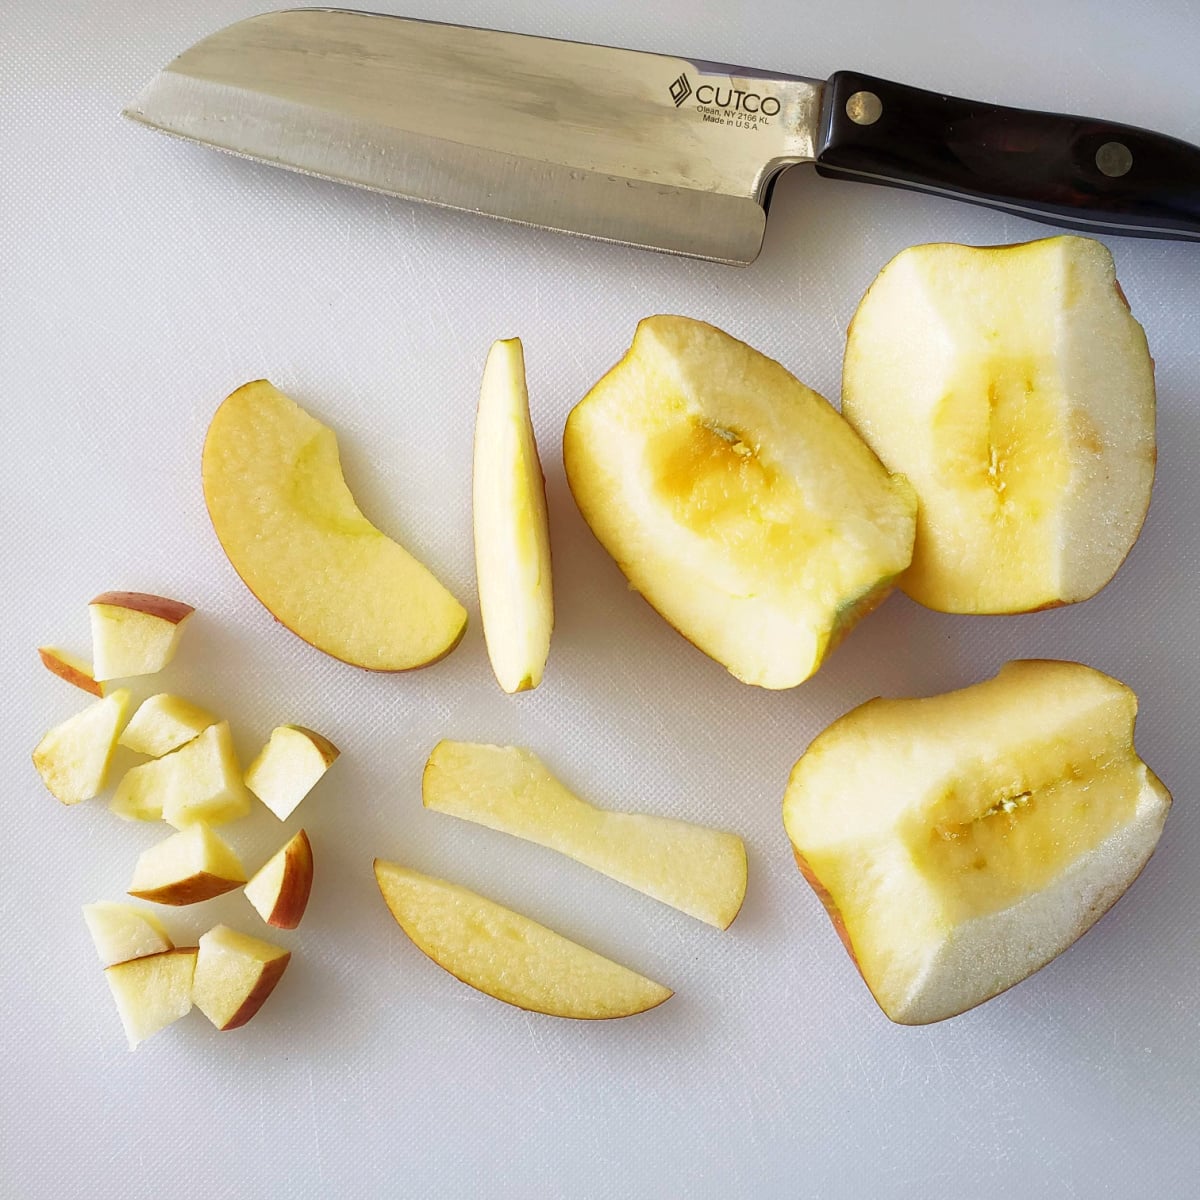 Chopping an apple in a small dice on a white cutting board, with a chef's knife alongside